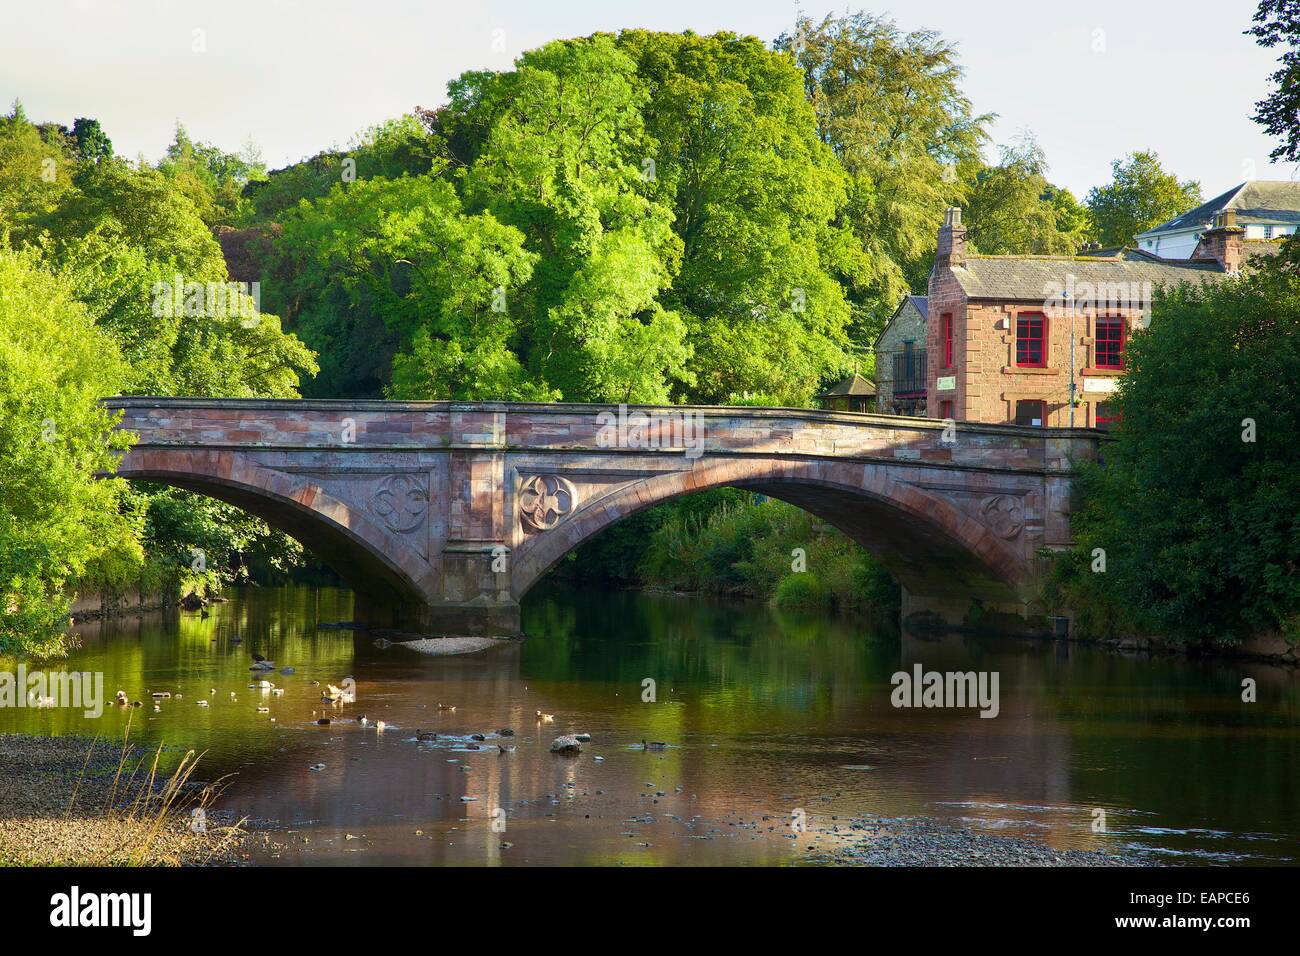 St Lawrence's Bridge over the River Eden. Appleby-in-Westmorland, Cumbria, England, United Kingdom. Stock Photo